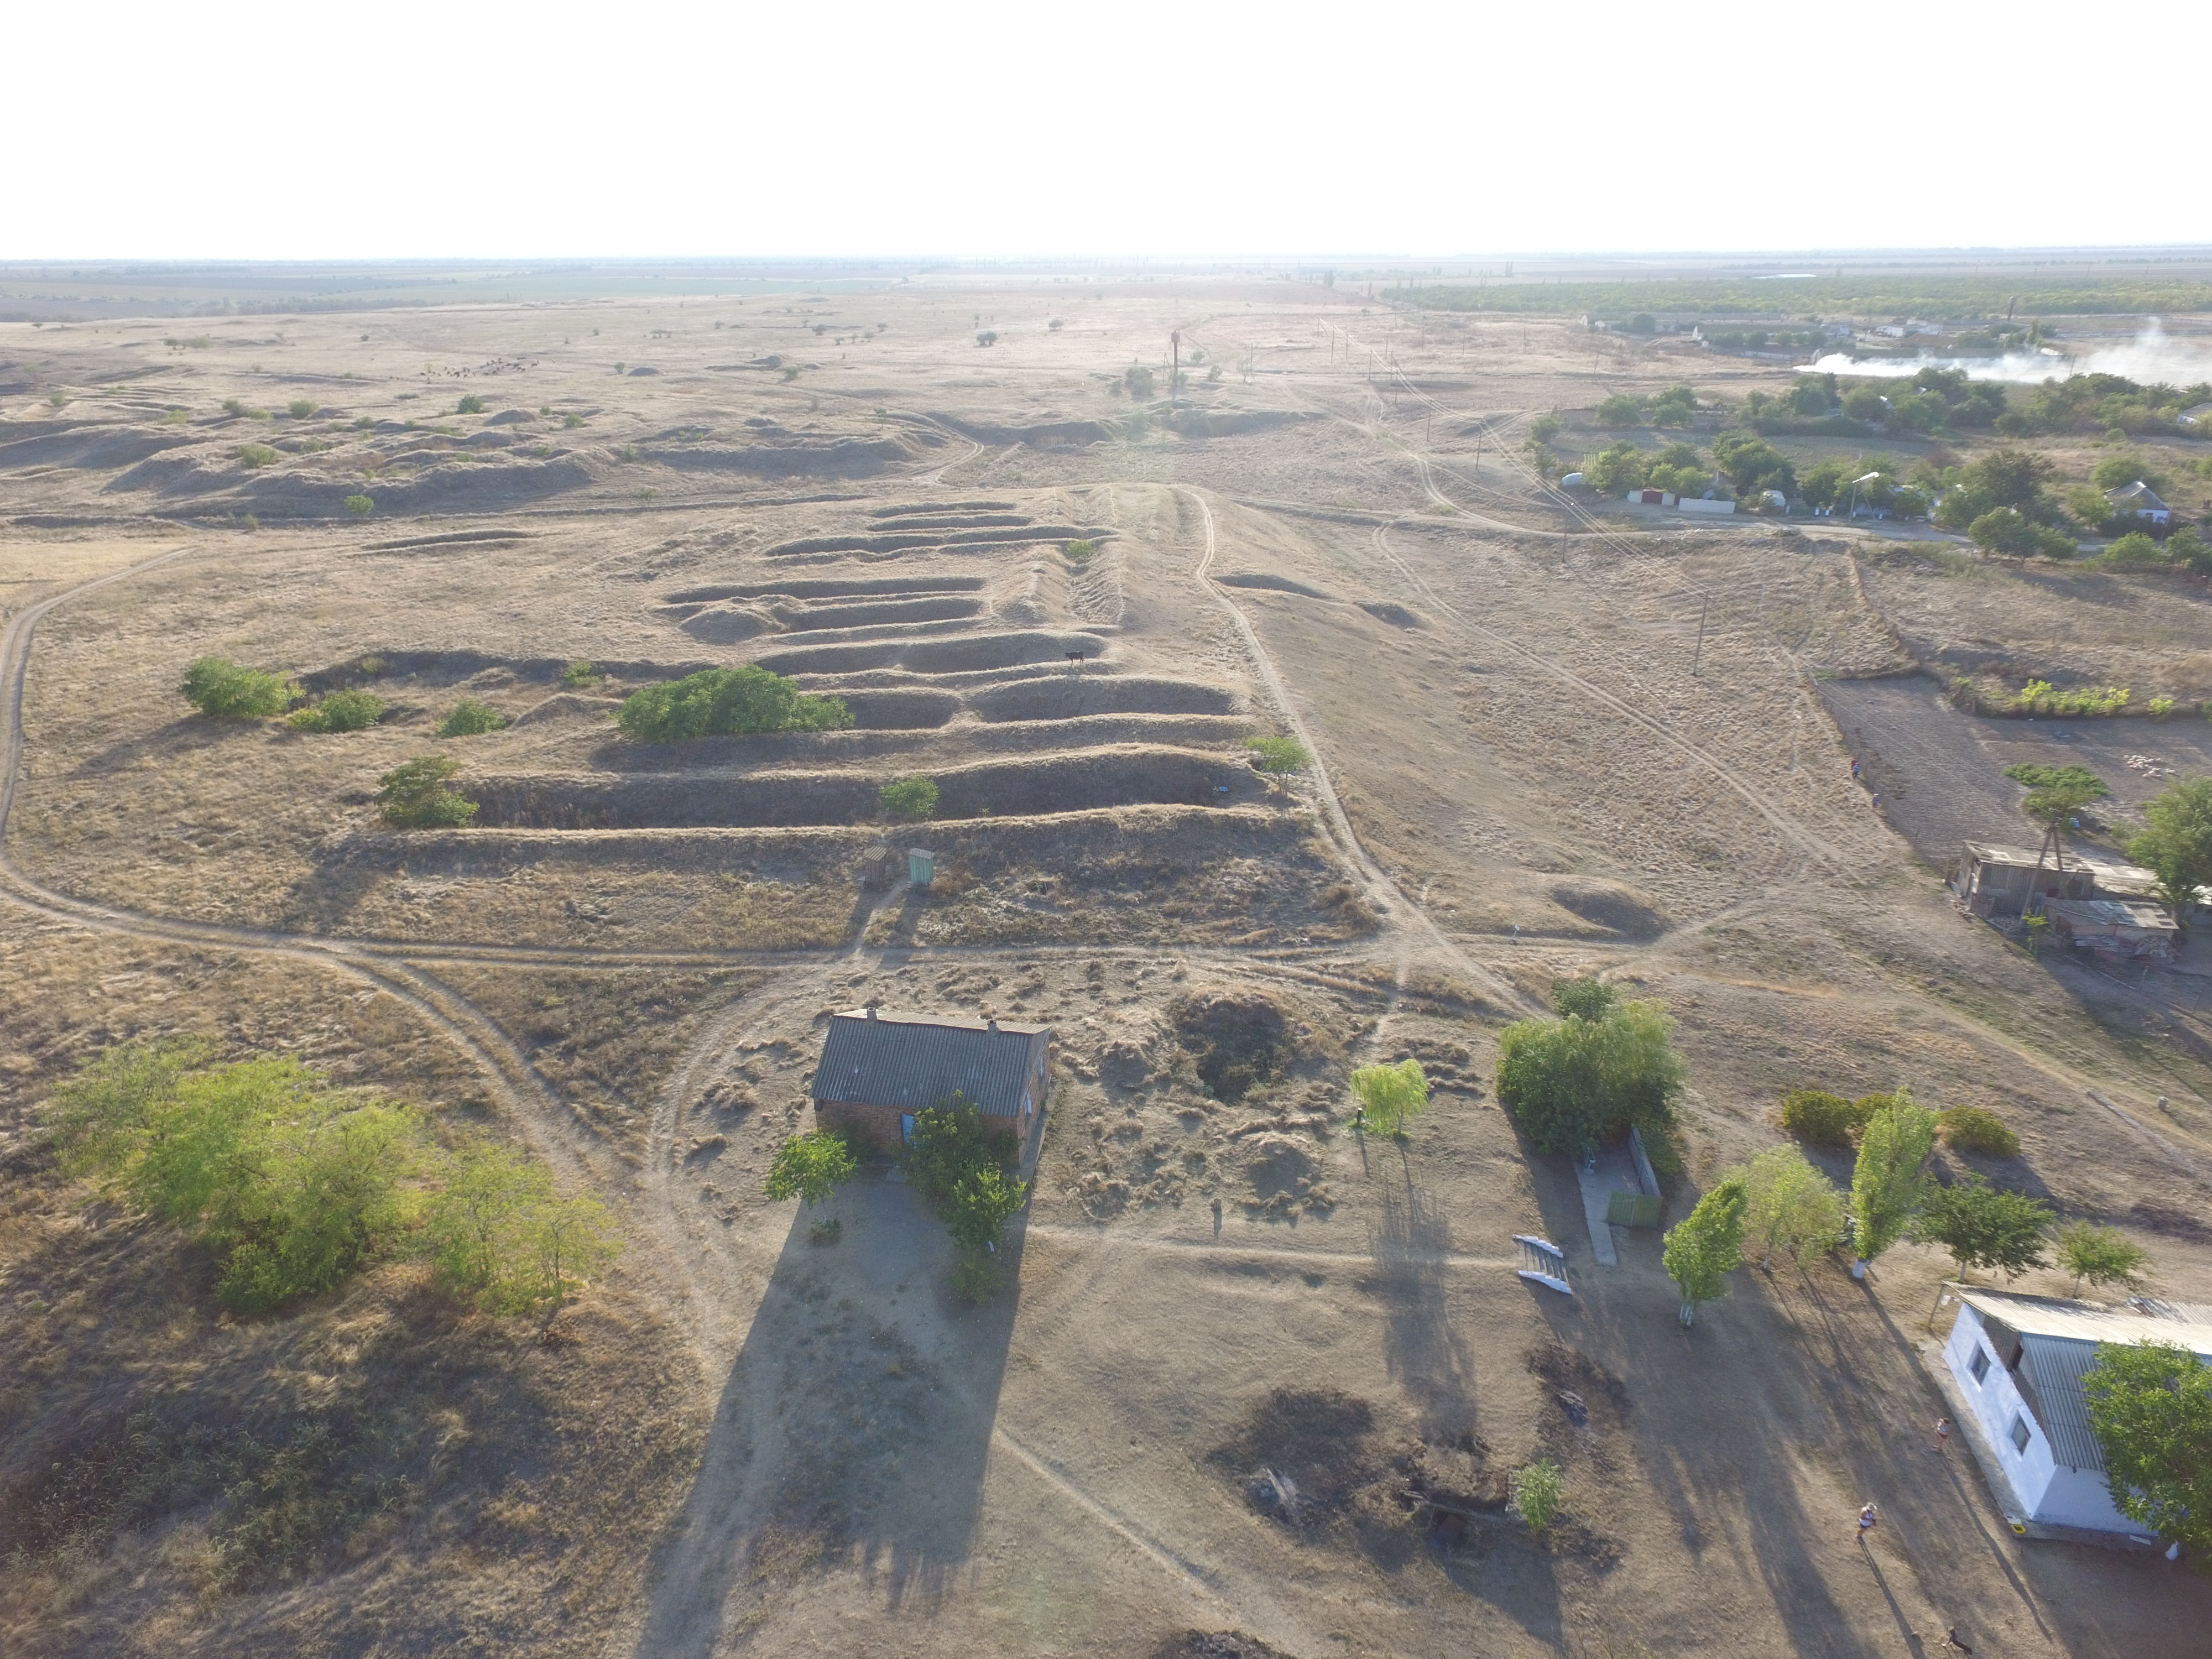 View of some of the oldest excavations from a drone, photo by Szymon Lenarczyk